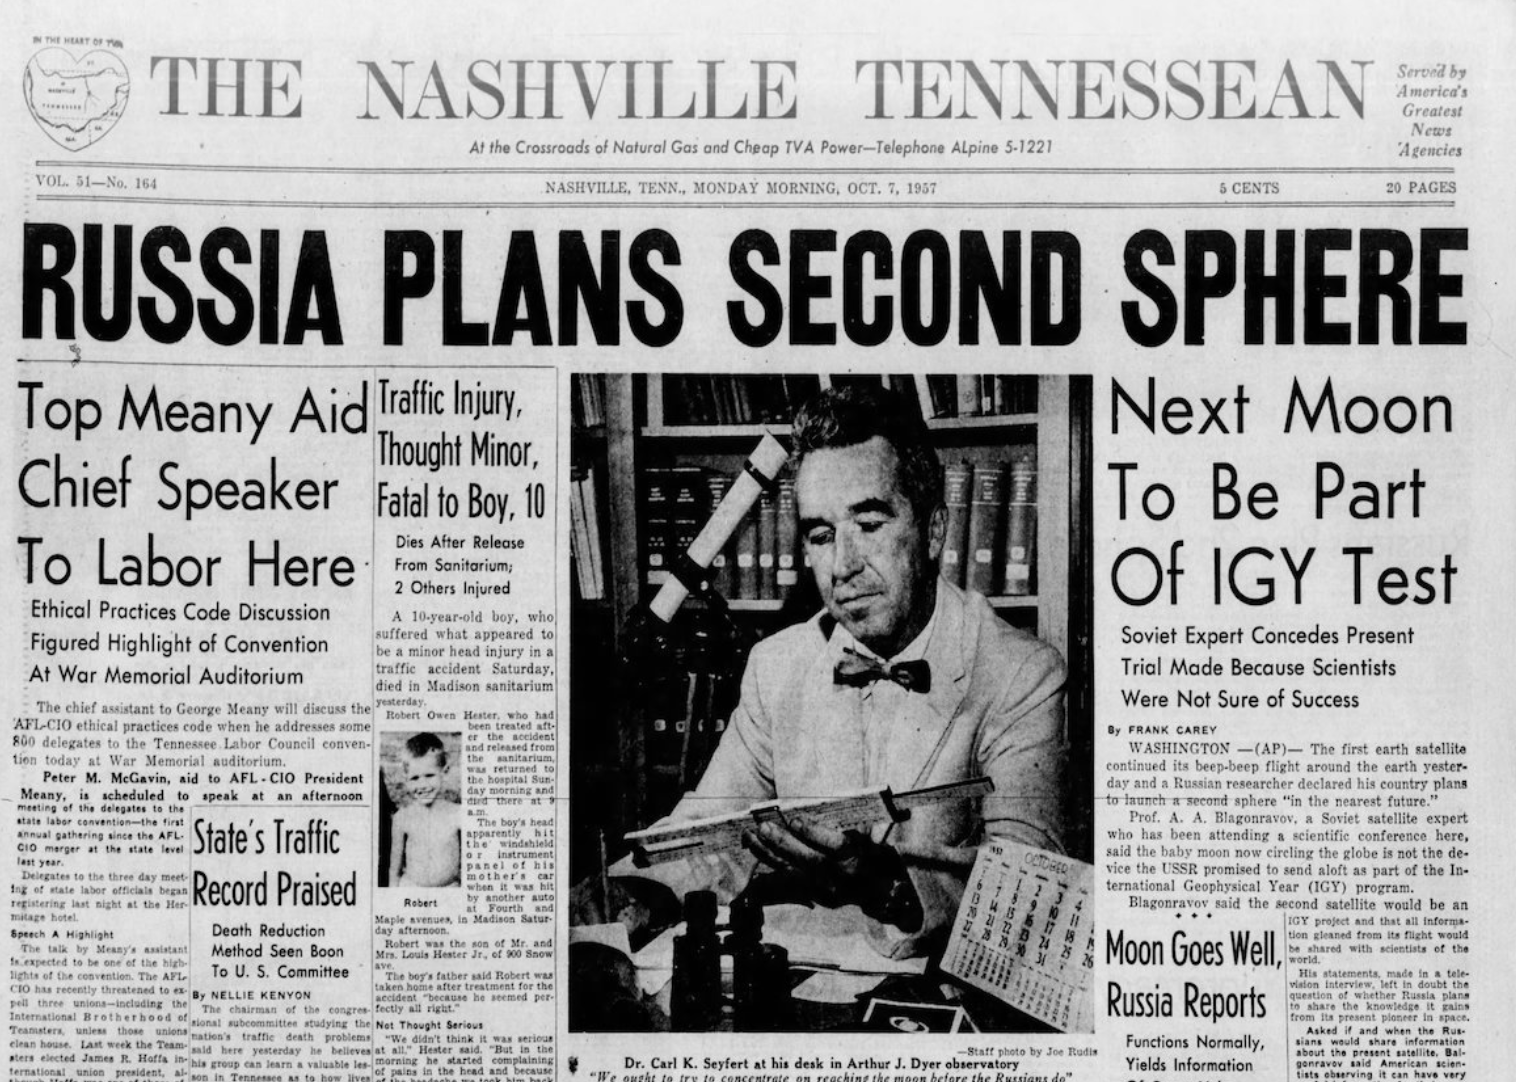 Russia Plans Second Sphere news article from The Nashville Tennessean.